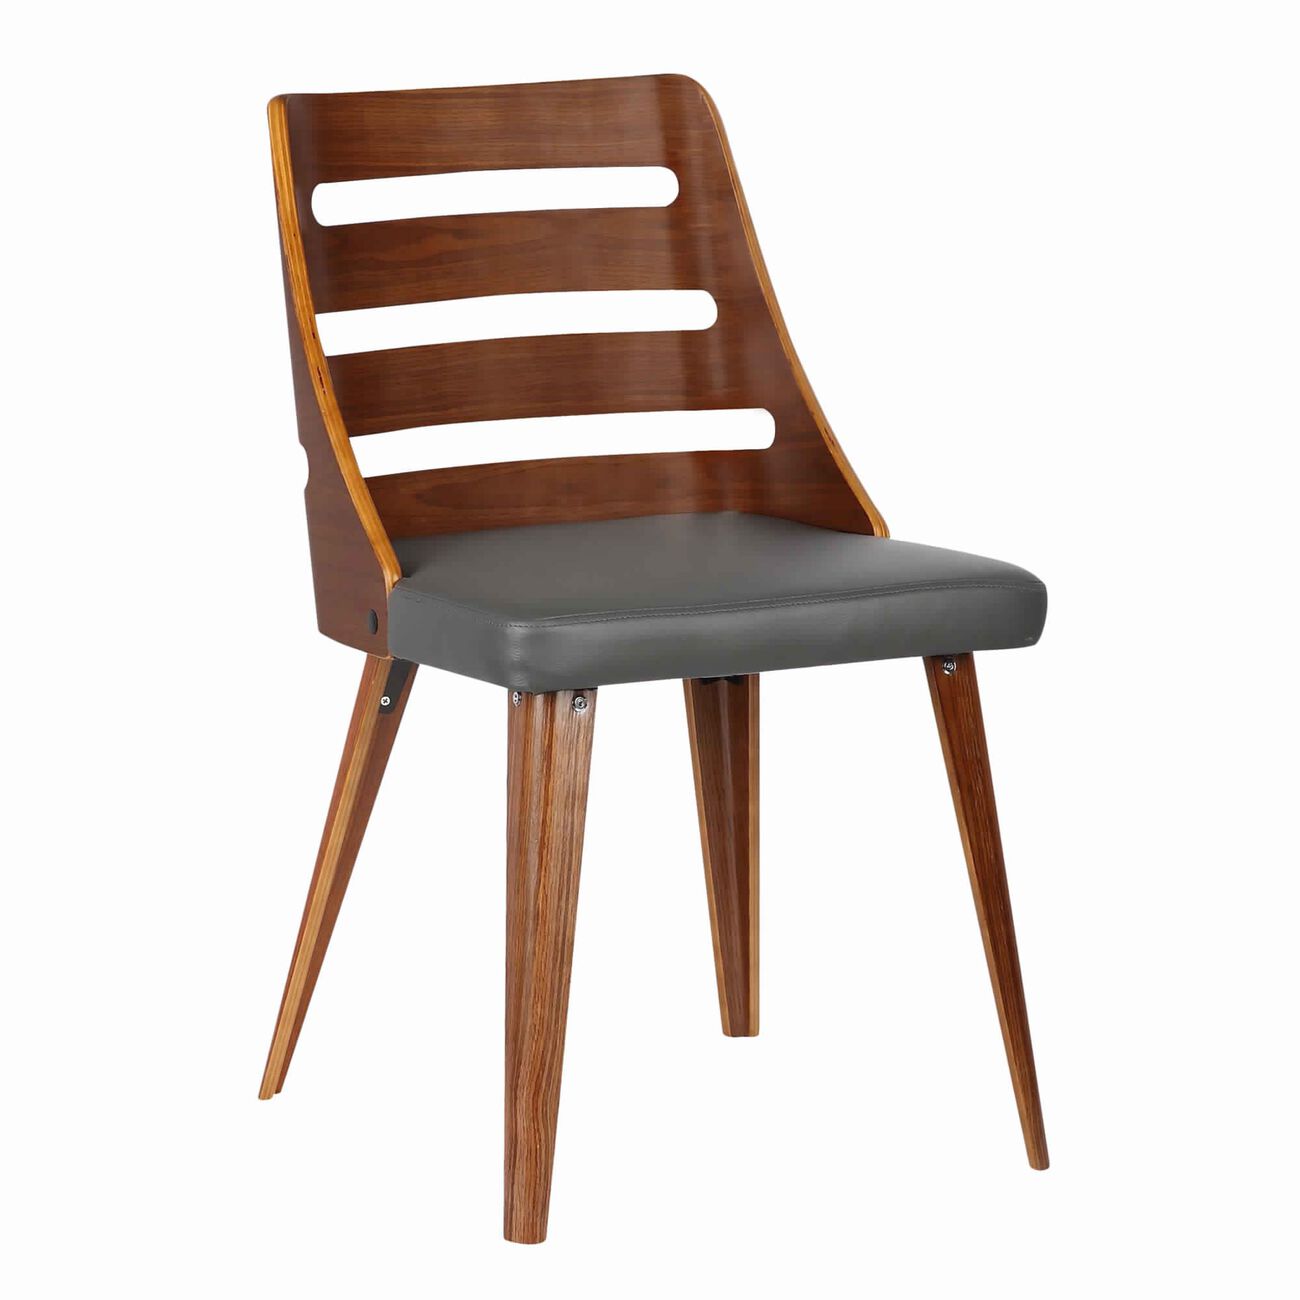 Leatherette Seat Dining Chair with Curved Ladder Backrest, Brown and Gray